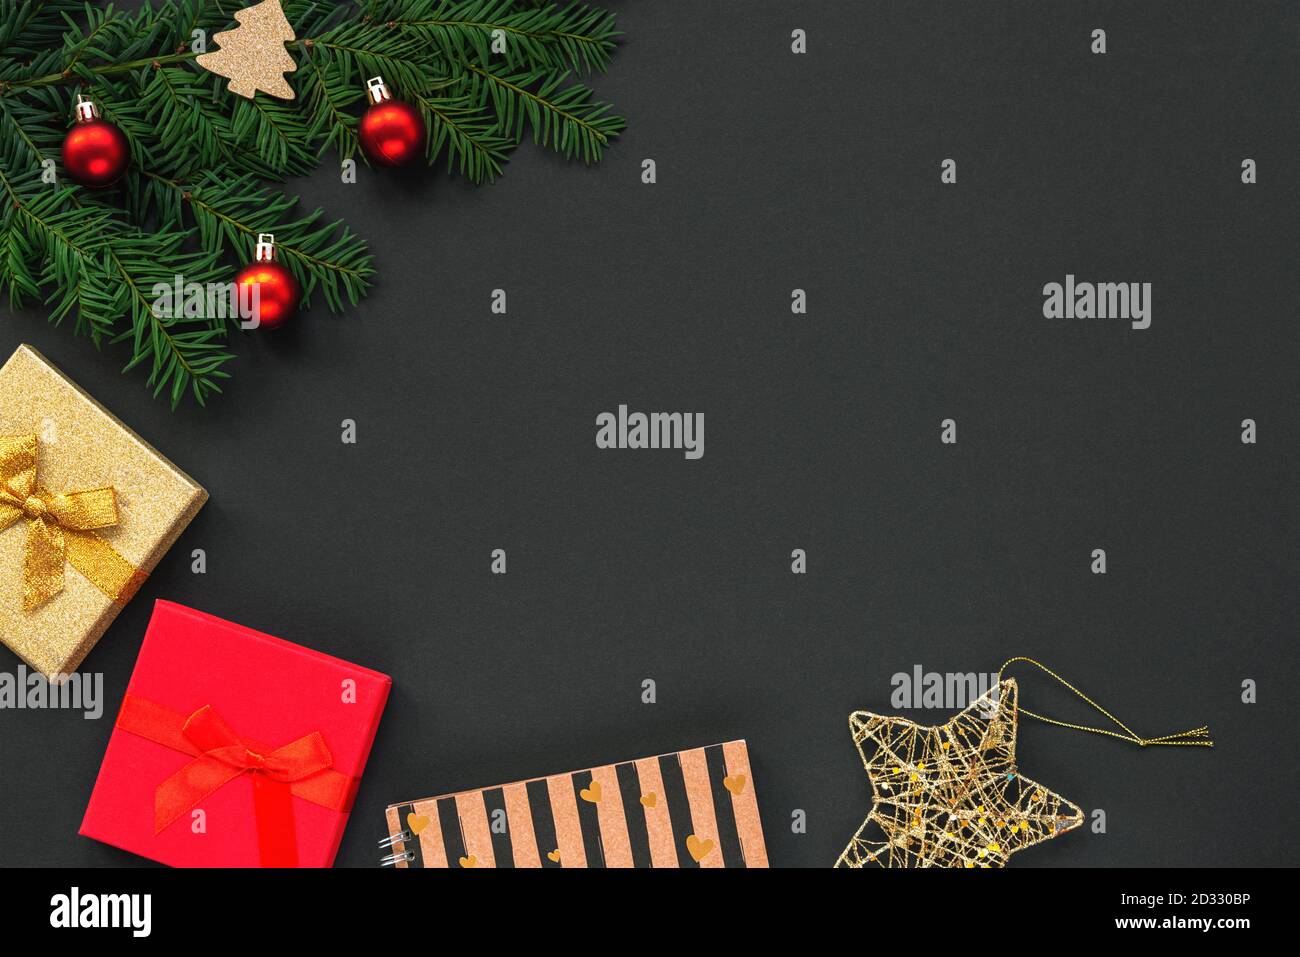 Festive Christmas background with fir tree, gifts in a boxes and toys on black. Top view, flat lay, copy space. Stock Photo